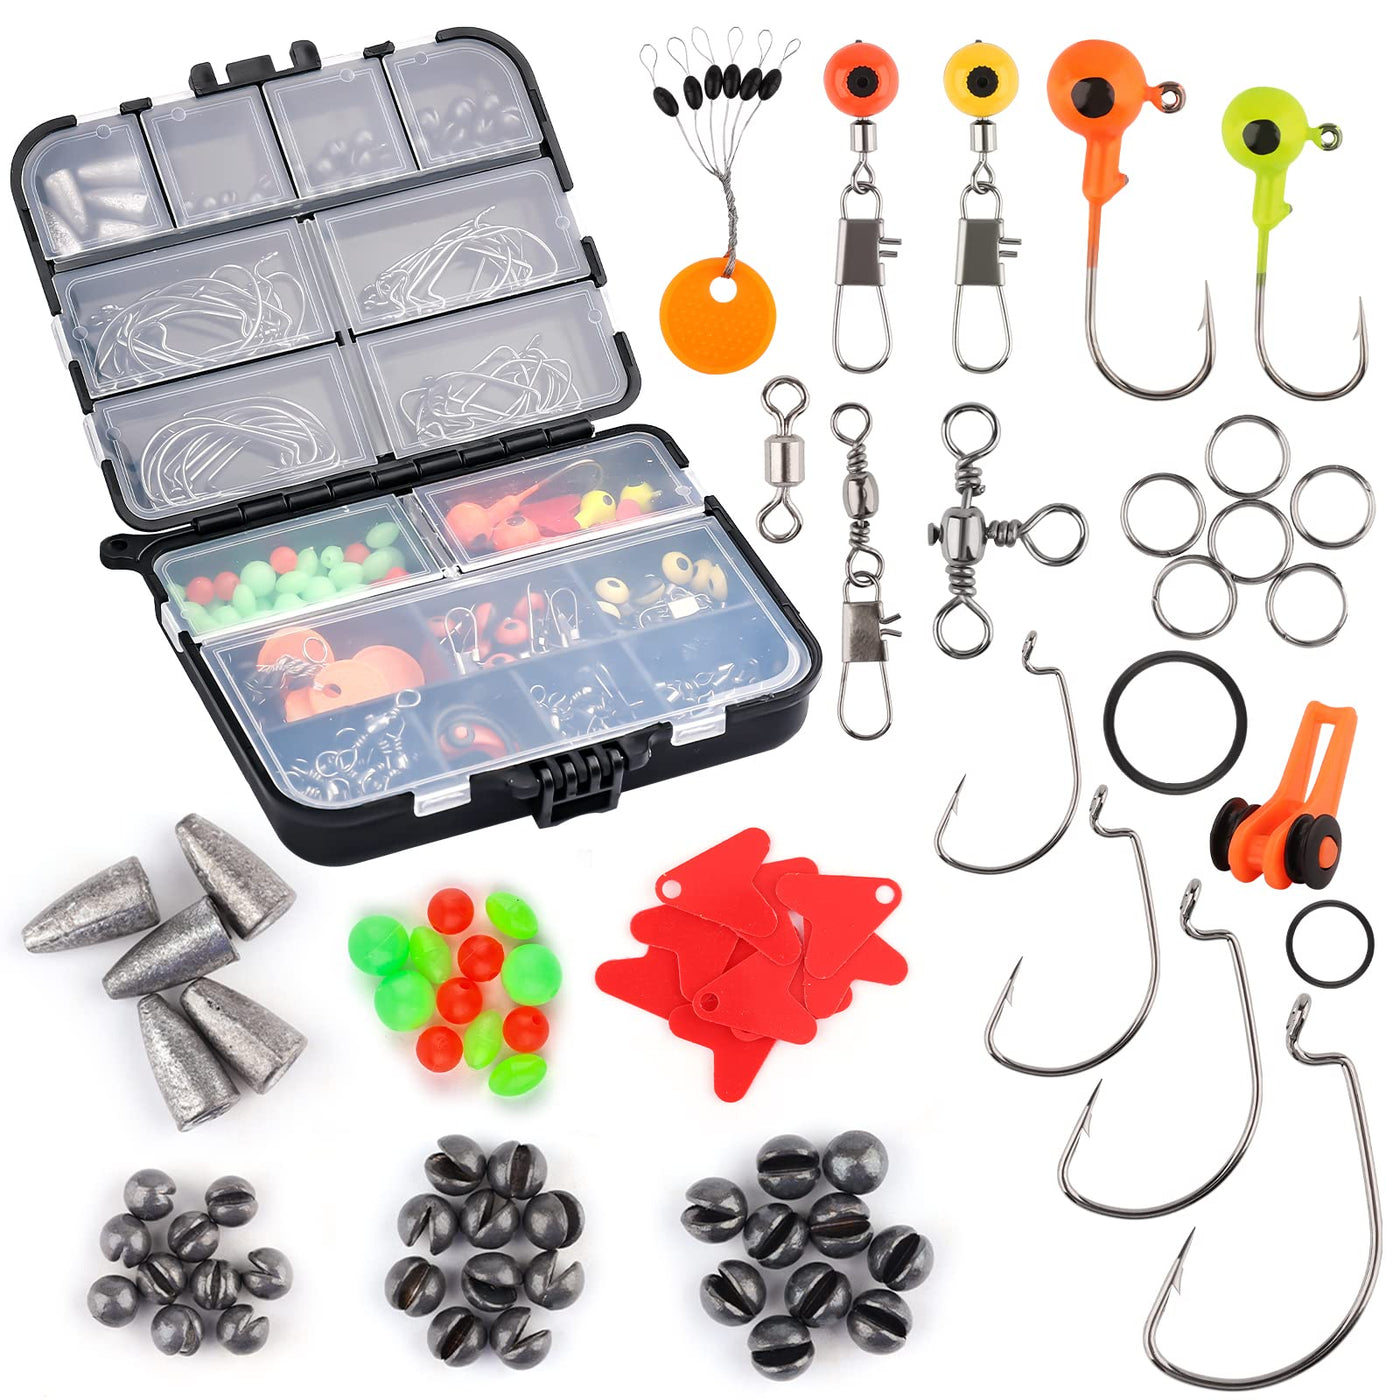 AIEX 205pcs Fishing Tackle Kit with Tackle Box, Assorted Fishing  Accessories Kit Including Fishing Hooks, Bullet Split Shot Weighs, Luminous  Fishing Beads, Barrel Snap Swivels, Fishing Stoppers